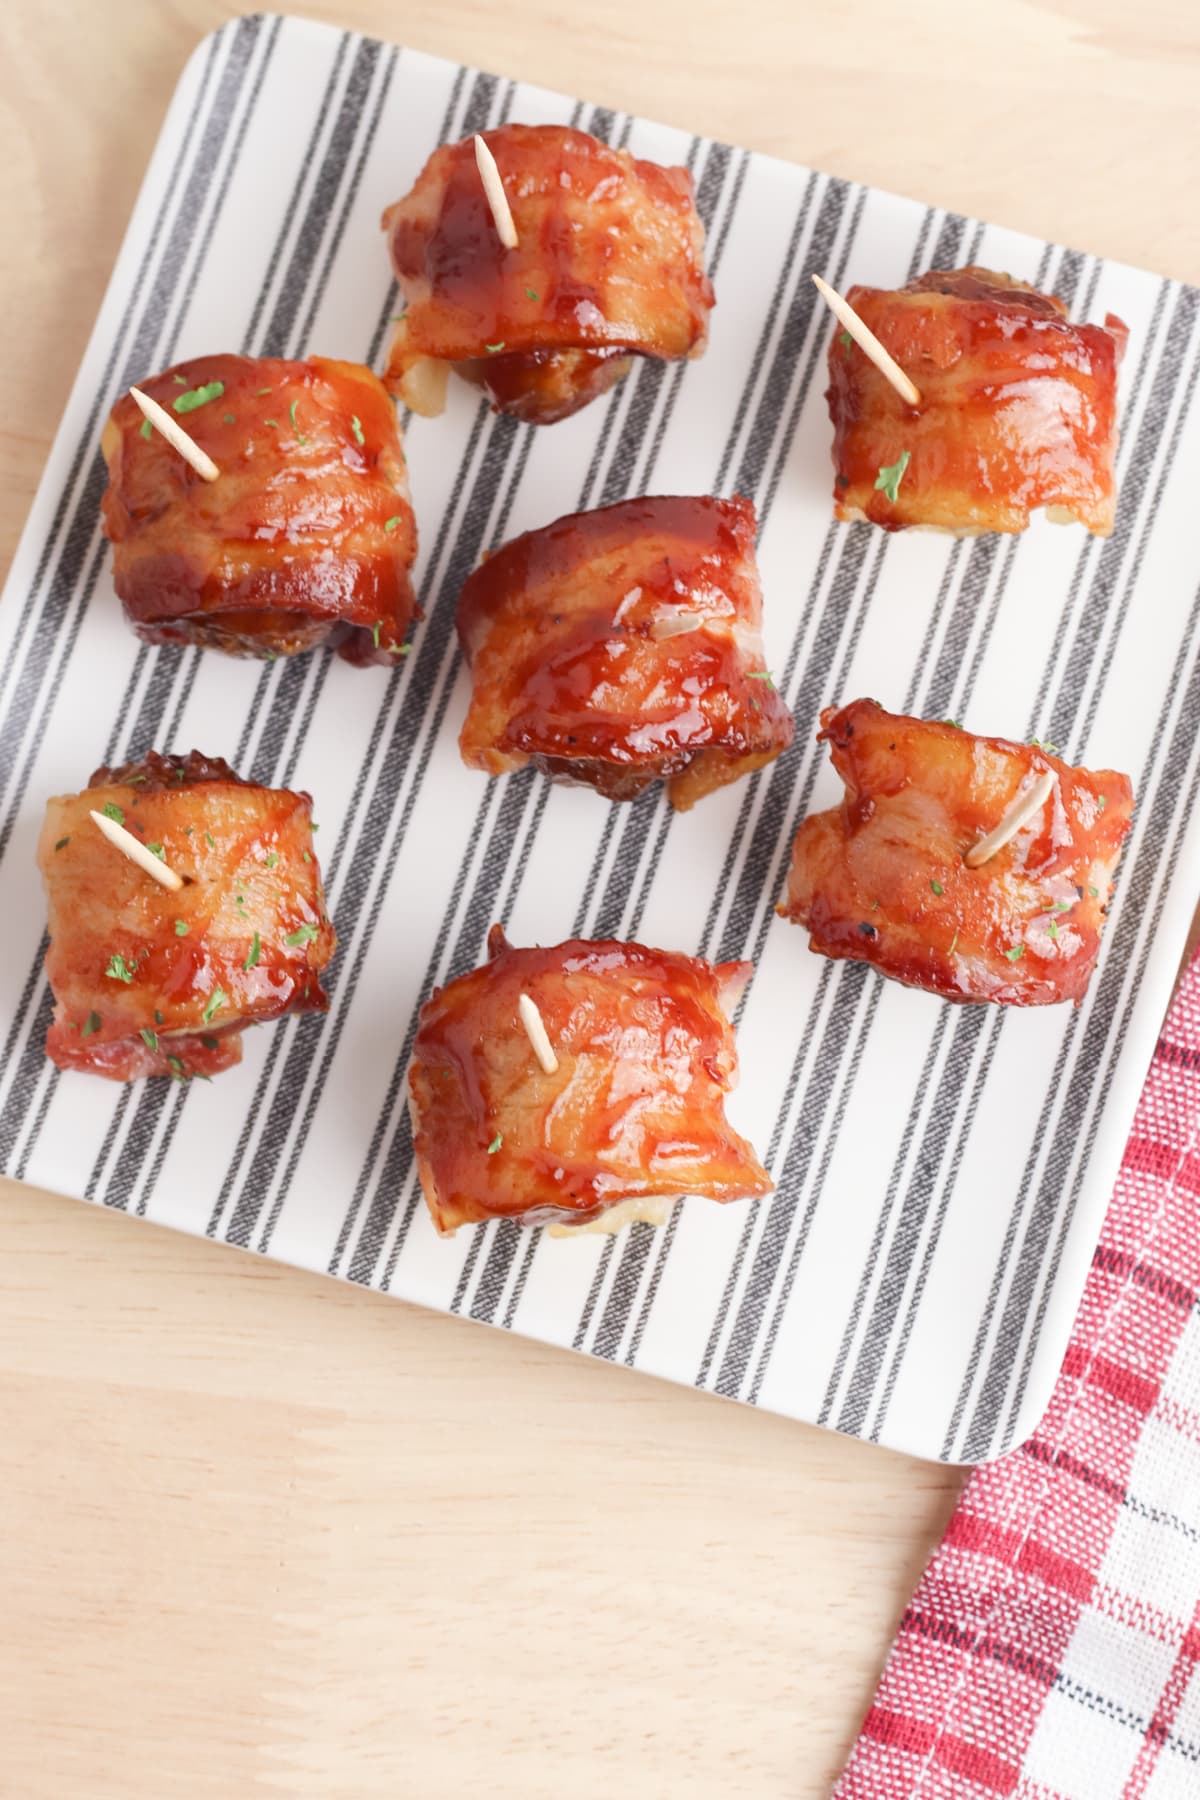 Bacon wrapped bbq meatballs from above